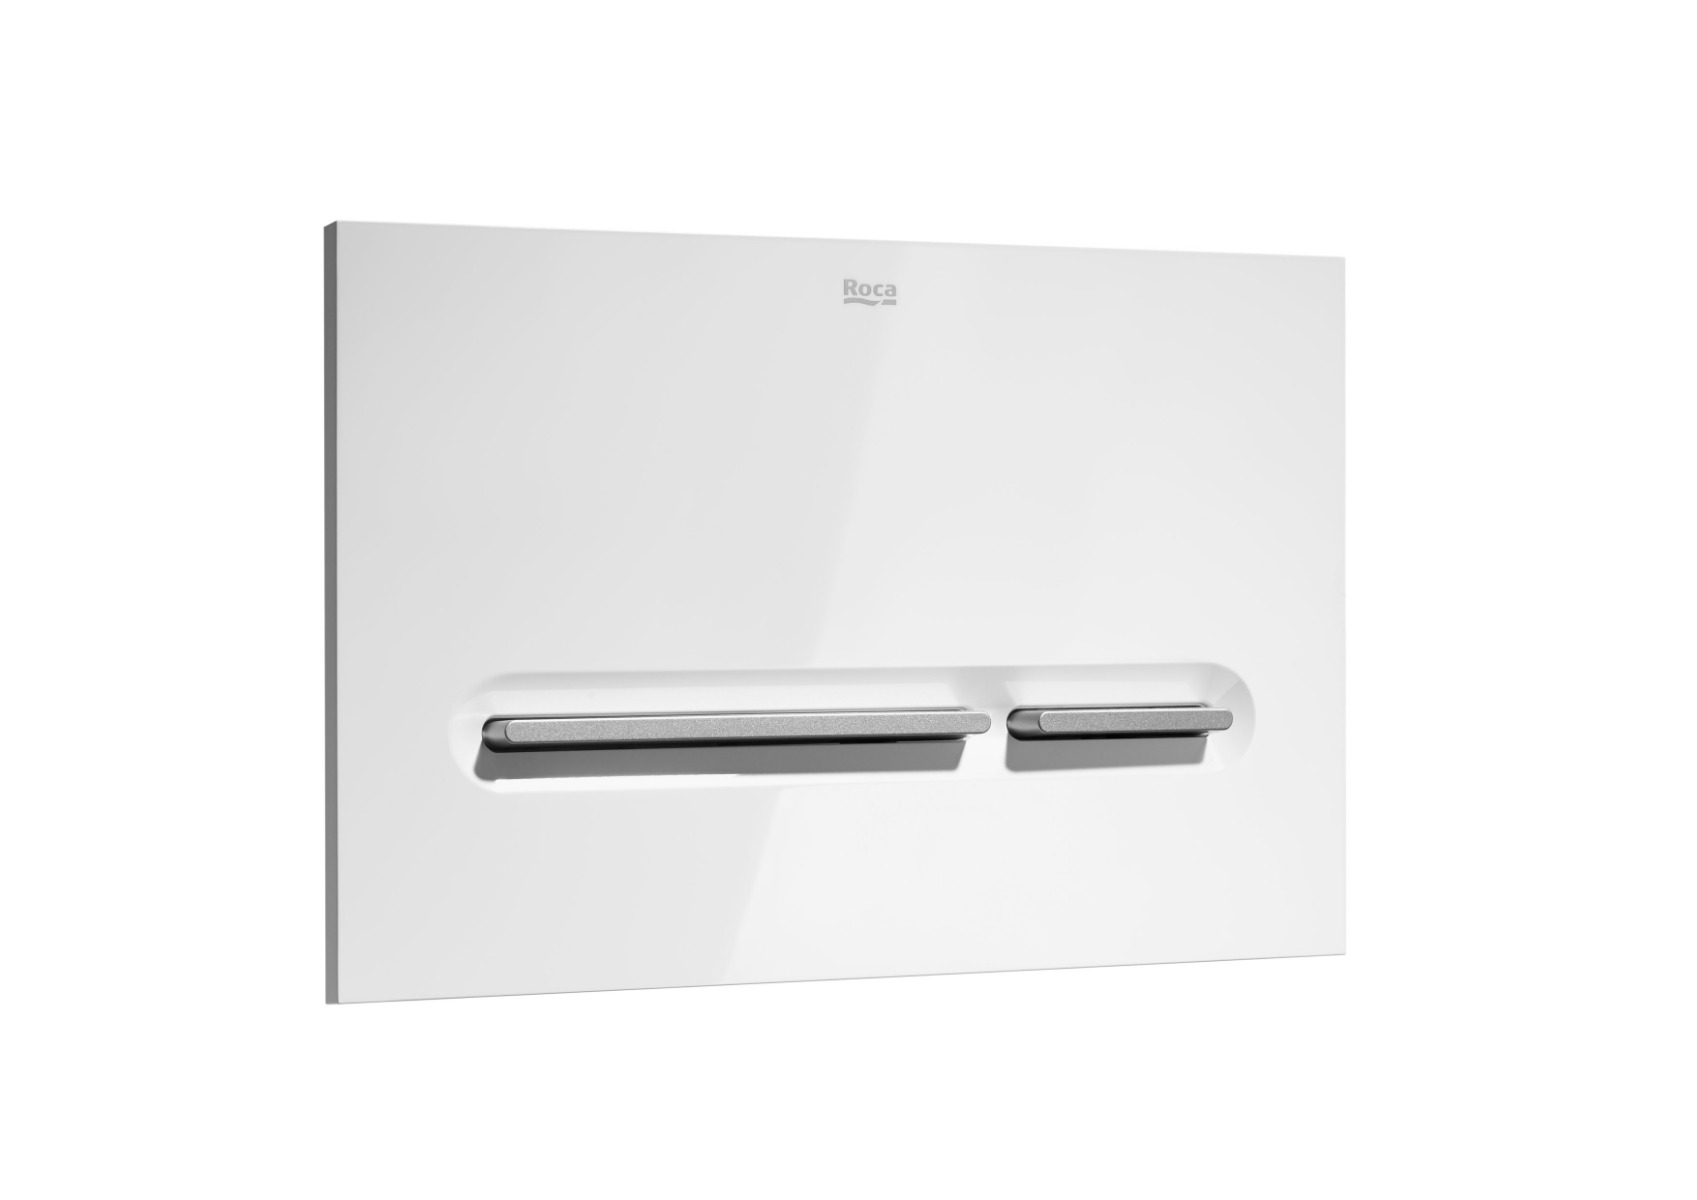 PL5 DUAL - Dual flush operating plate for concealed cistern white/grey